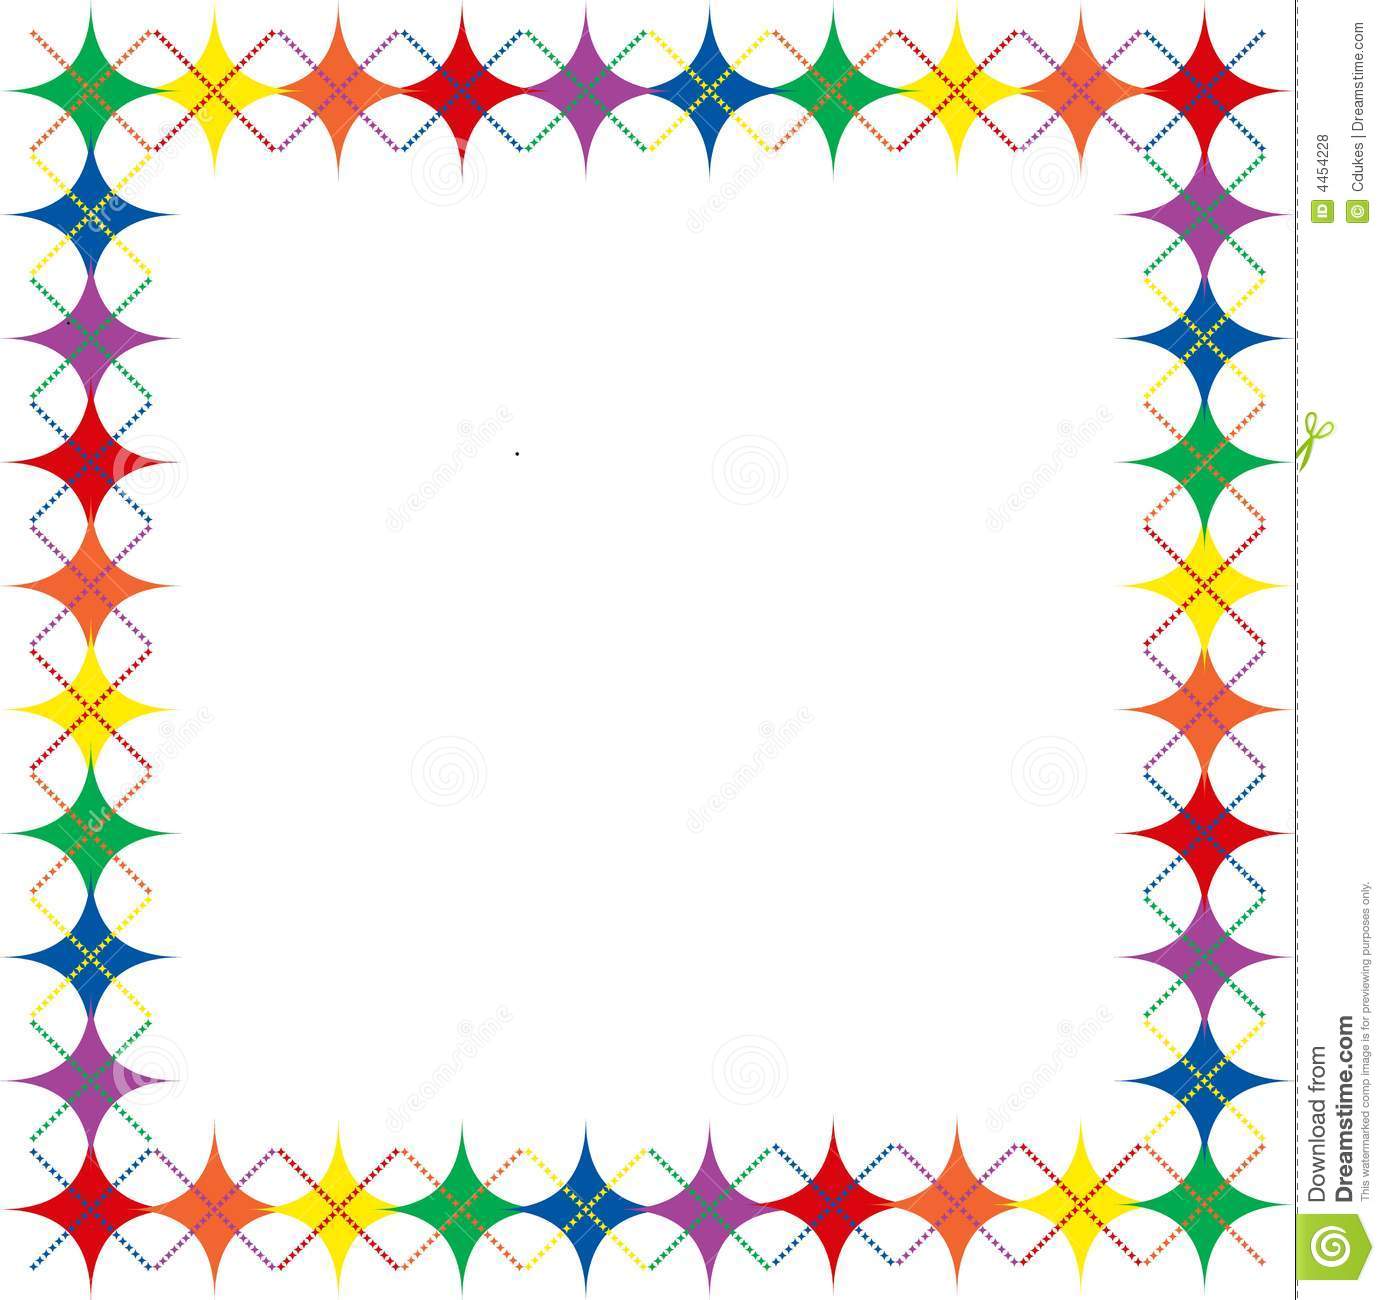 colorful-border-design-royalty-free-vector-image